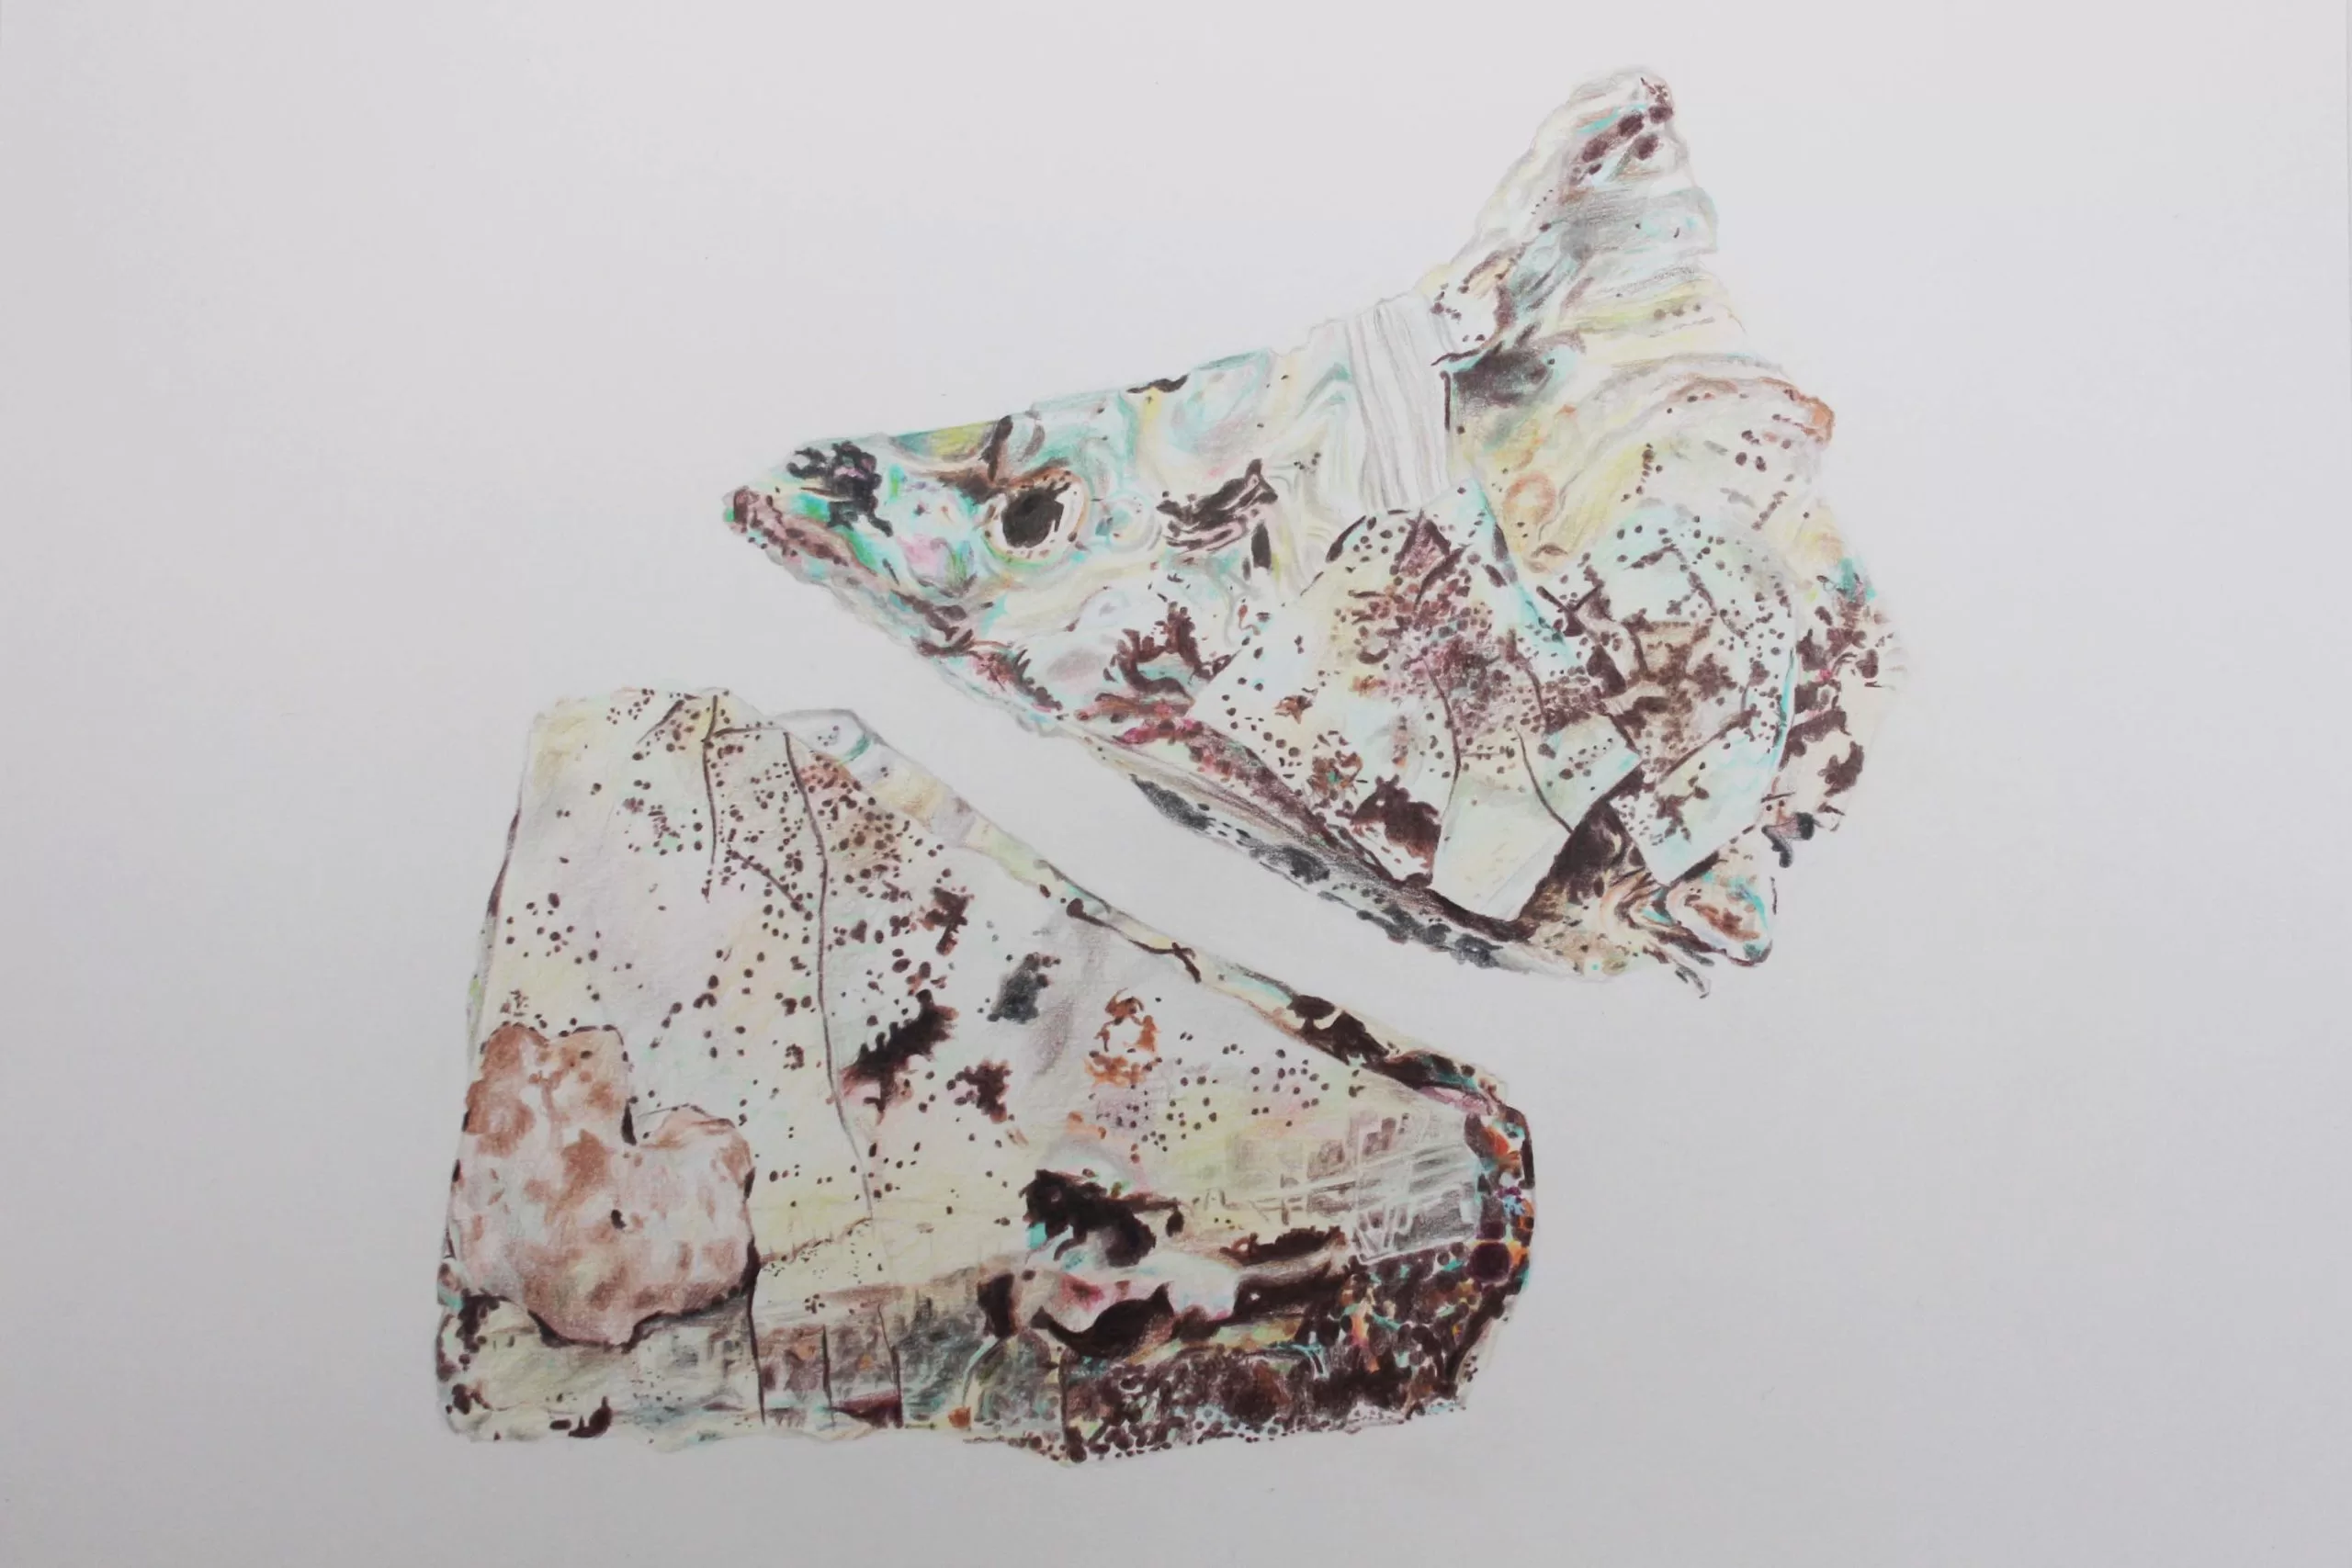 Two Fragments coloured pencil drawing by Abi Spendlove